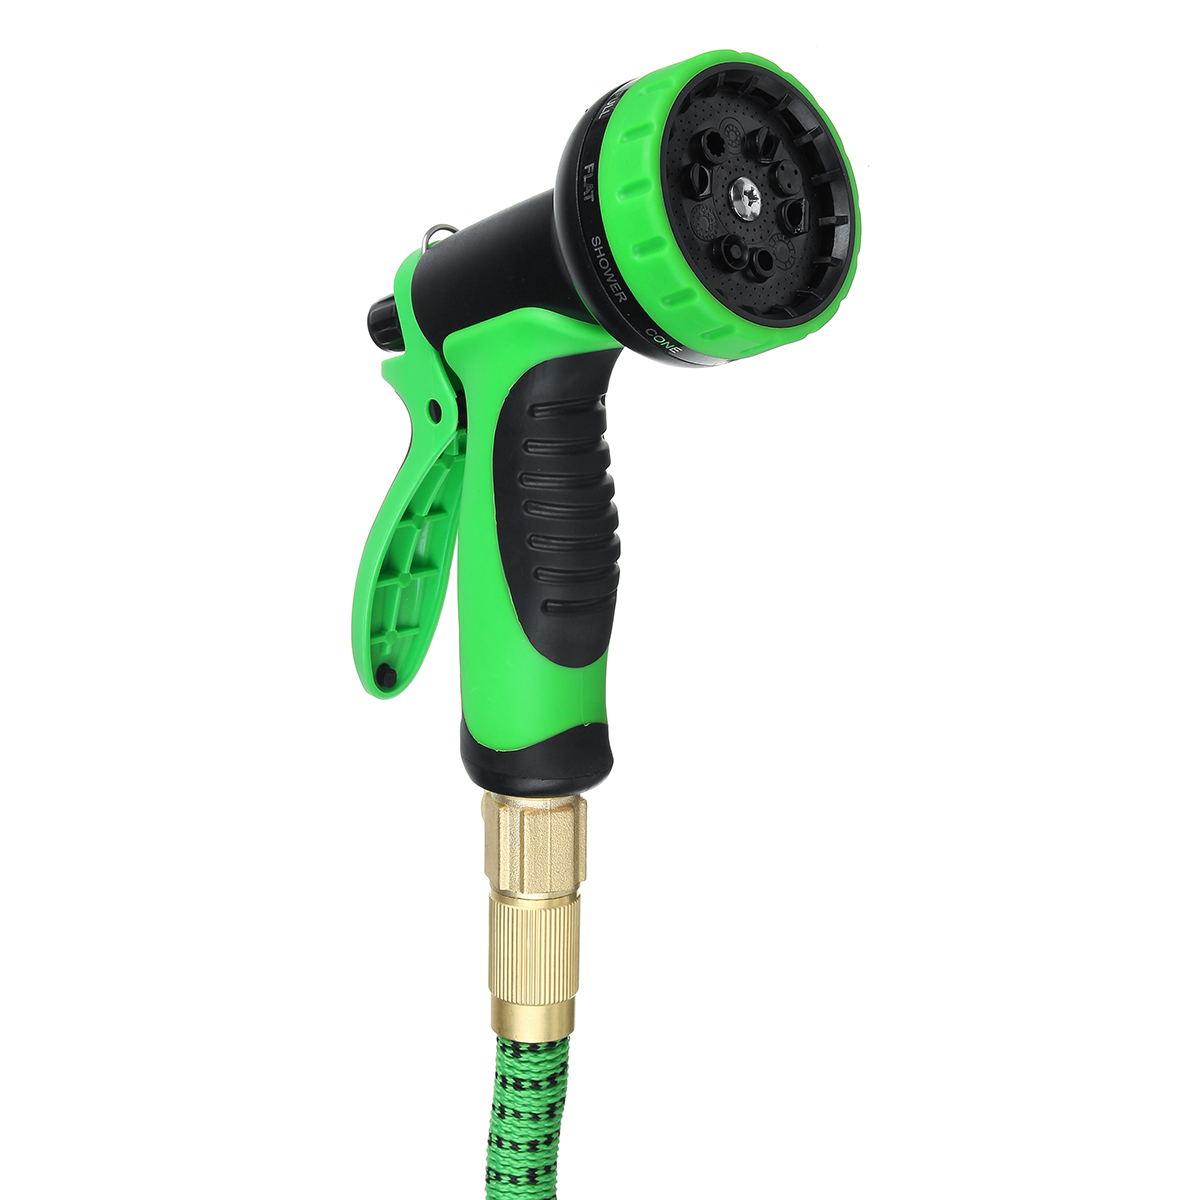 50/75/100FT Upgraded Expandable Garden Water Hose Function Spray Nozzle Green